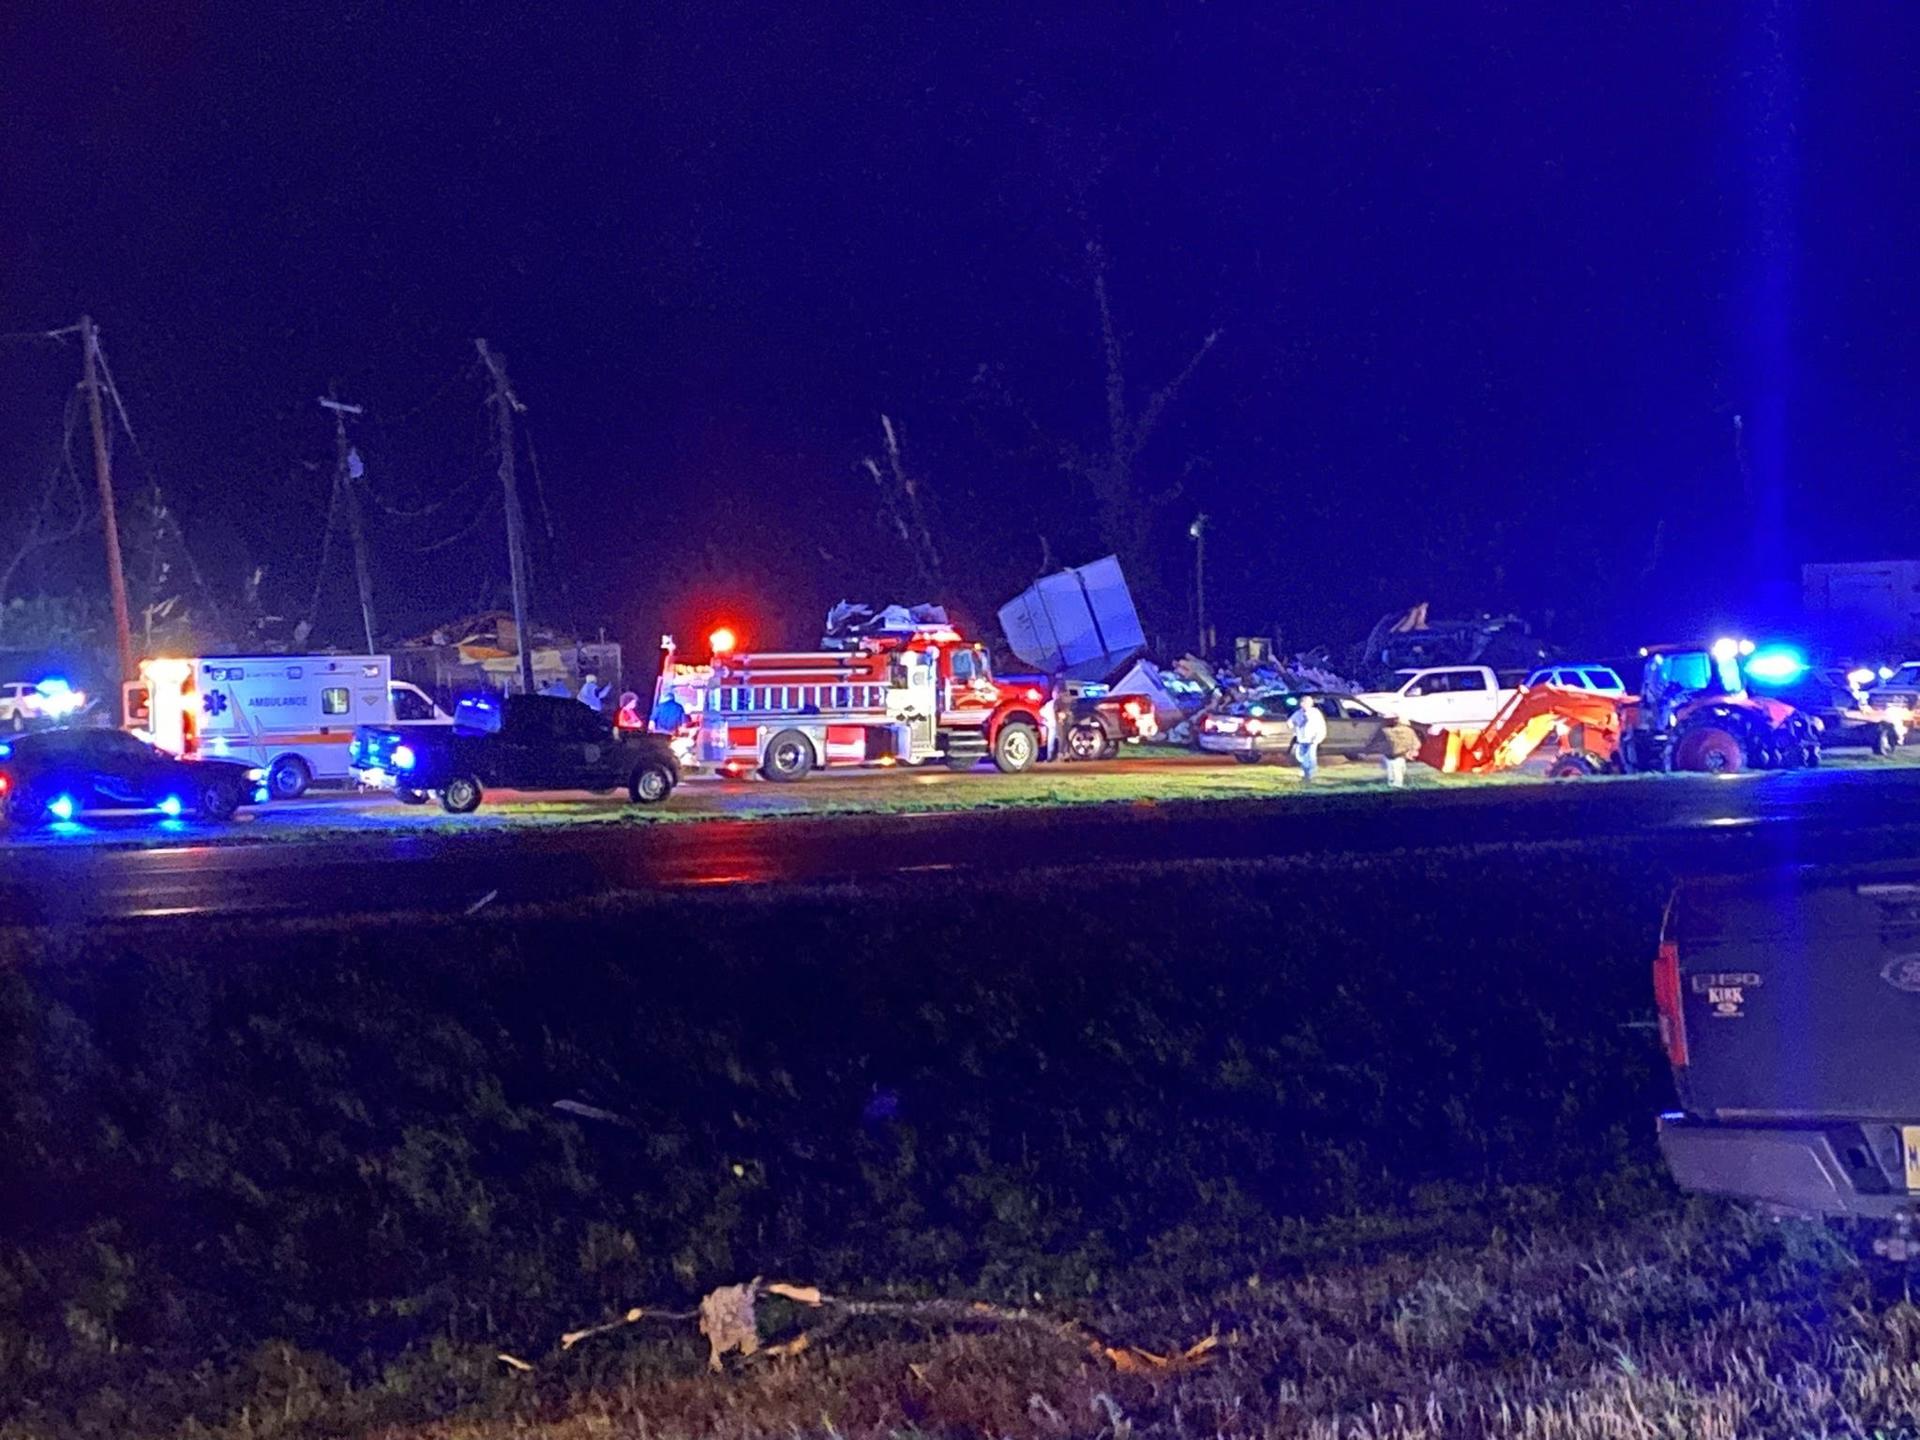 A handout photo made available by Mississippi Highway Patrol showing destruction and emergency services at the scene after tornadoes tore through the US state of Mississippi late 24 March 2023. EFE/EPA/MISSISSIPPI HIGHWAY PATROL